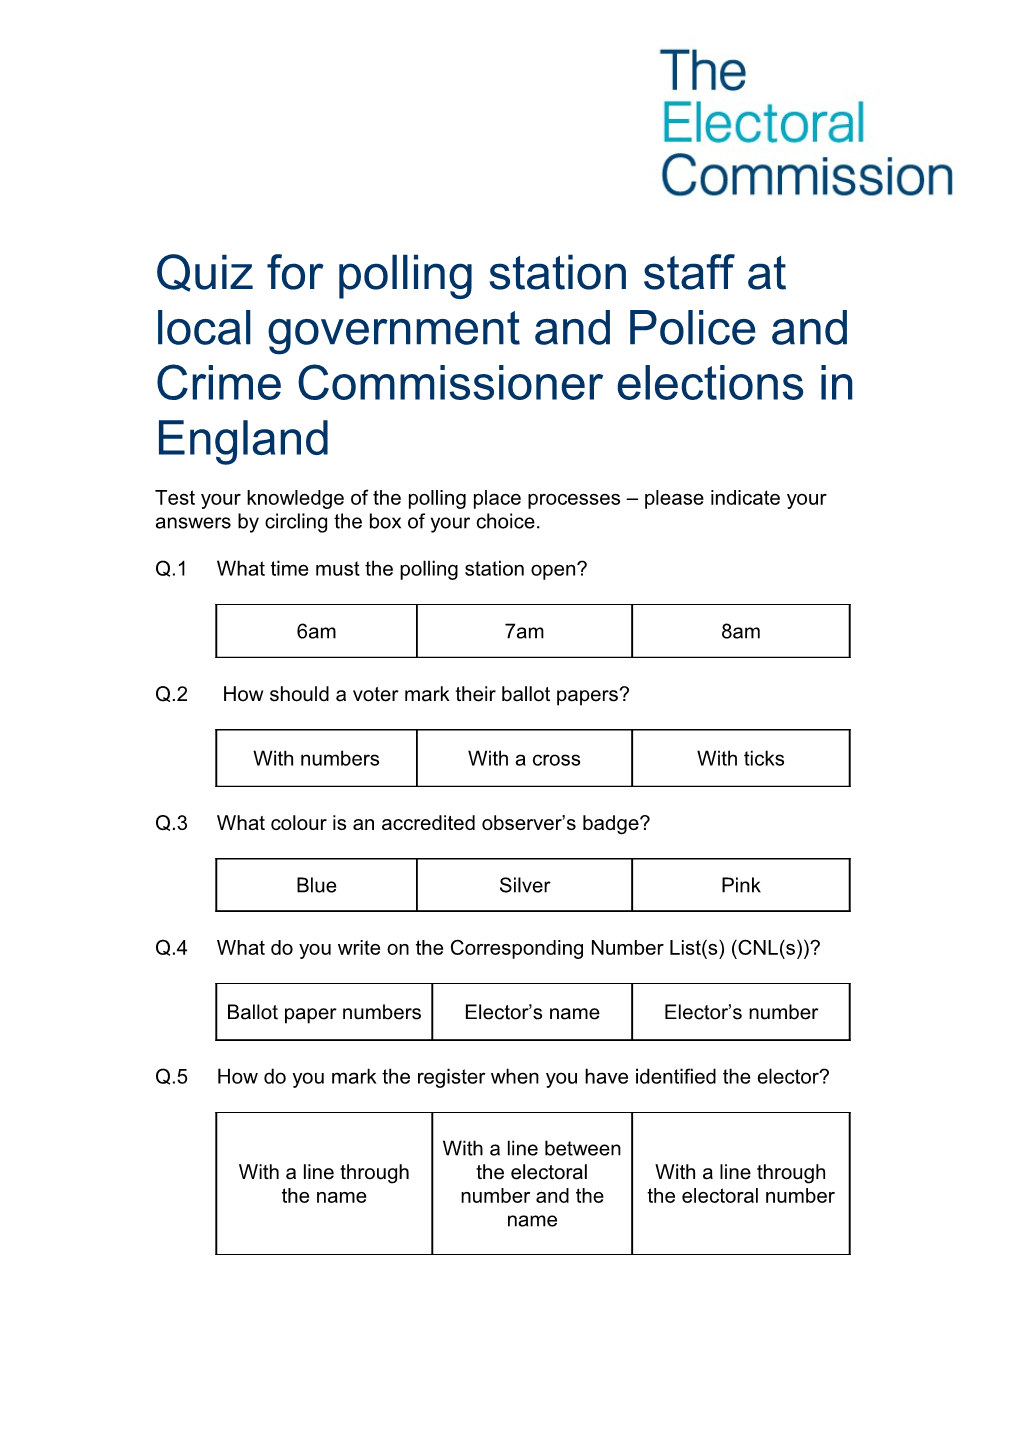 LGE-PCC Quiz for Polling Station Staff